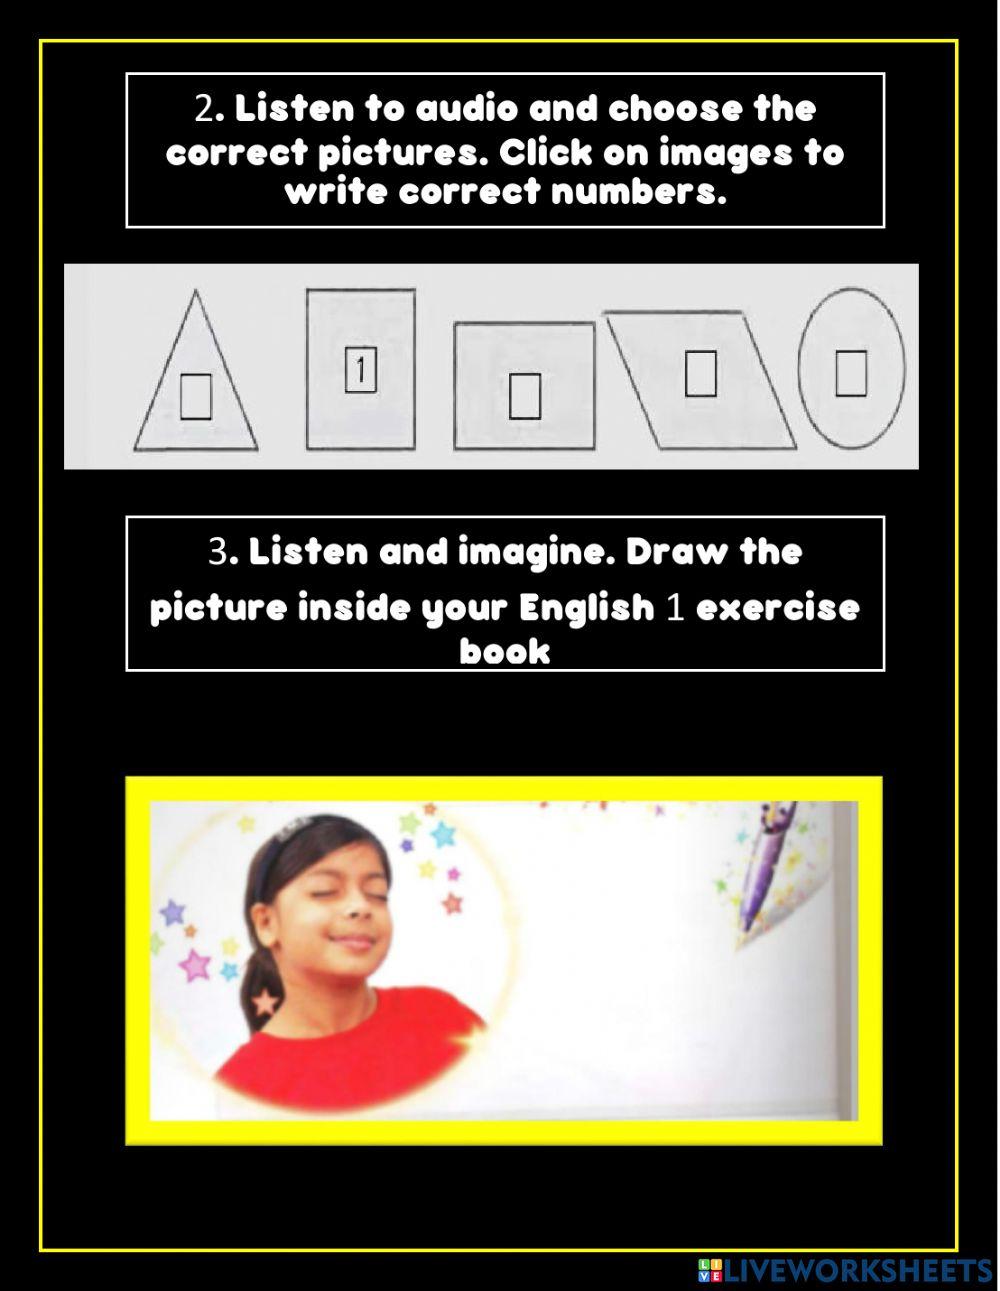 Supermind english book lets play page 32 & 33